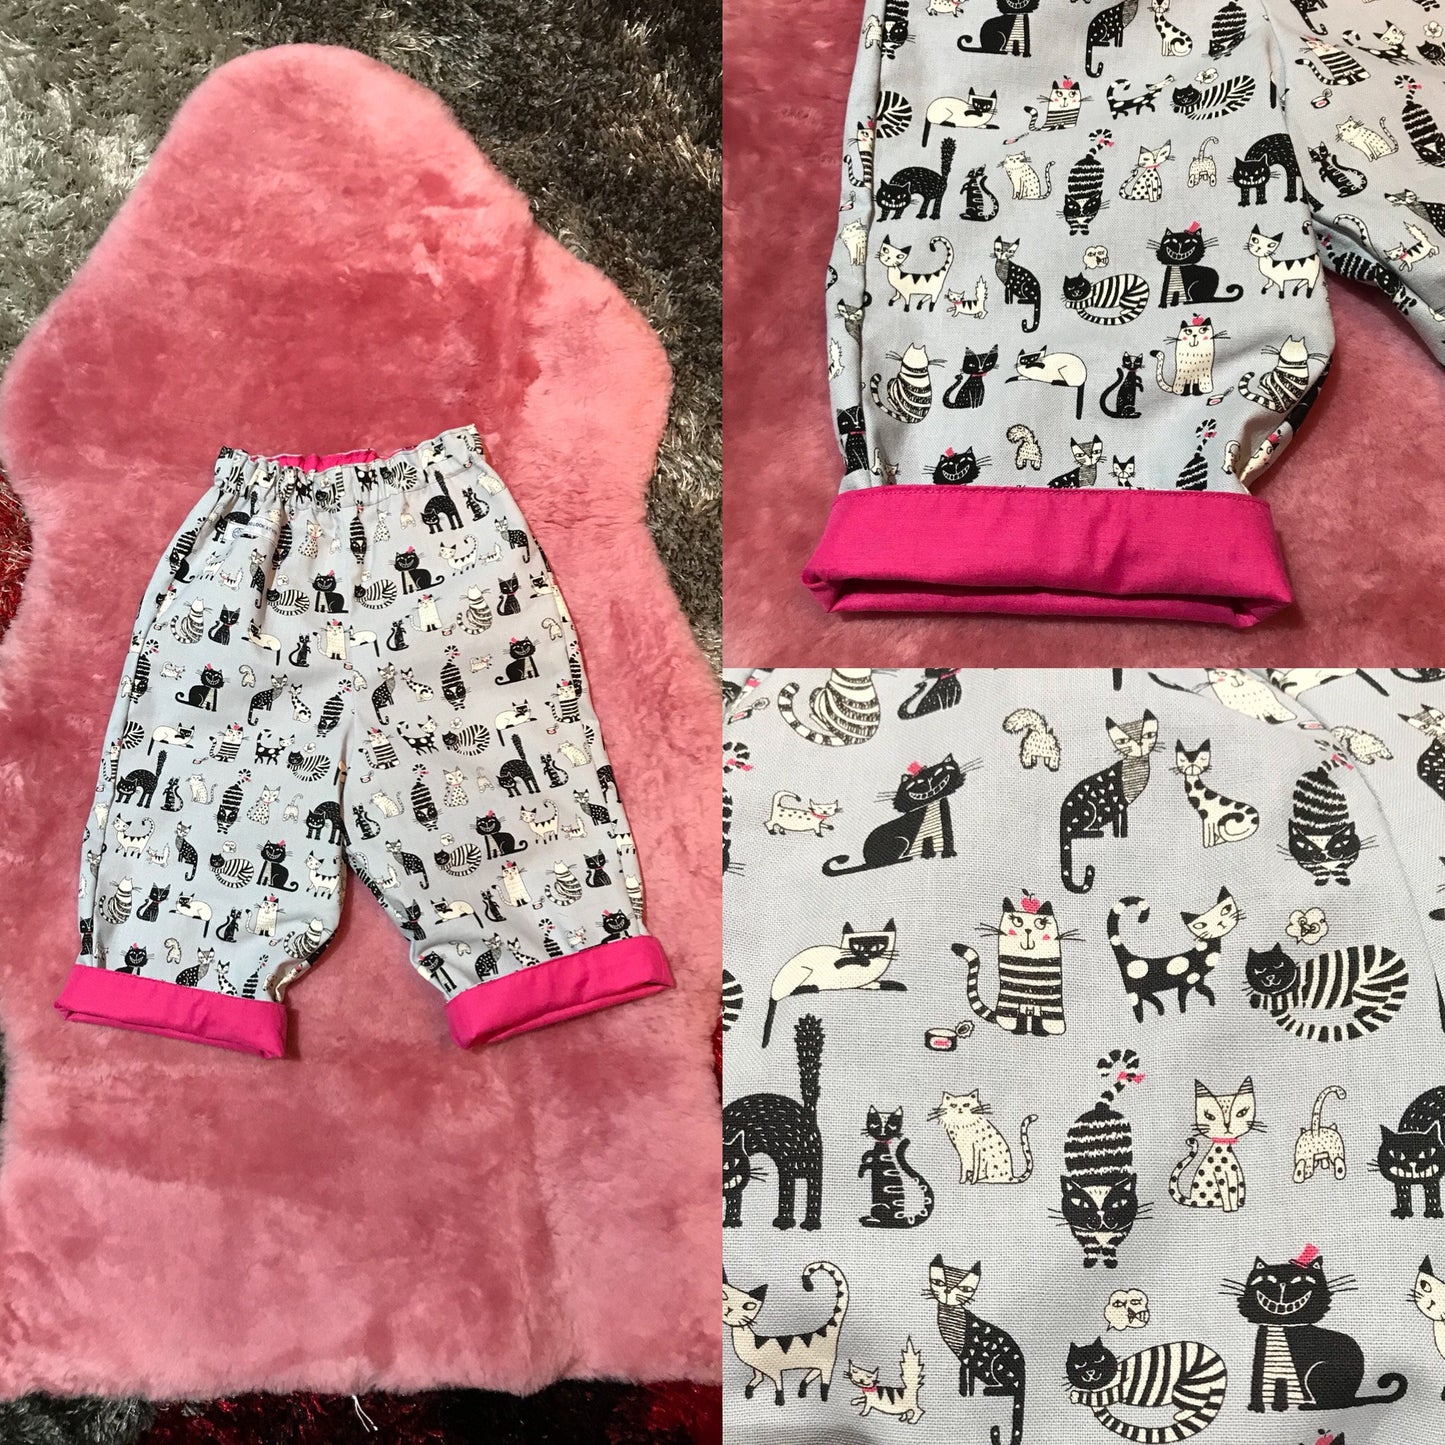 Pants - Buzoku Cotton - Lined - Black and White Cats on Grey with Hot Pink Trim